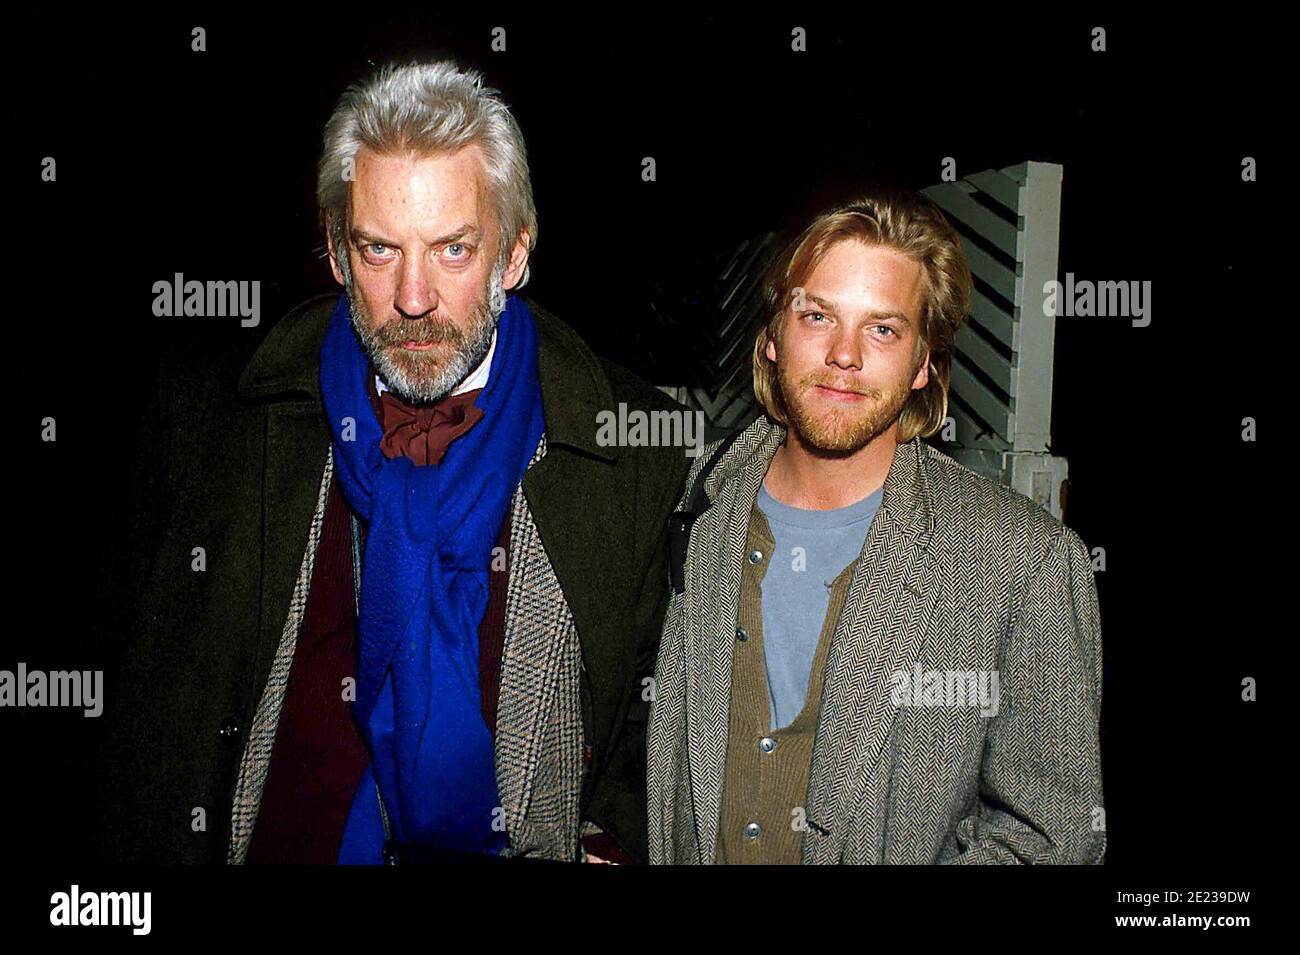 Donald Kiefer Sutherland And Kiefer Sutherland     Credit: Ralph Dominguez/MediaPunch Stock Photo